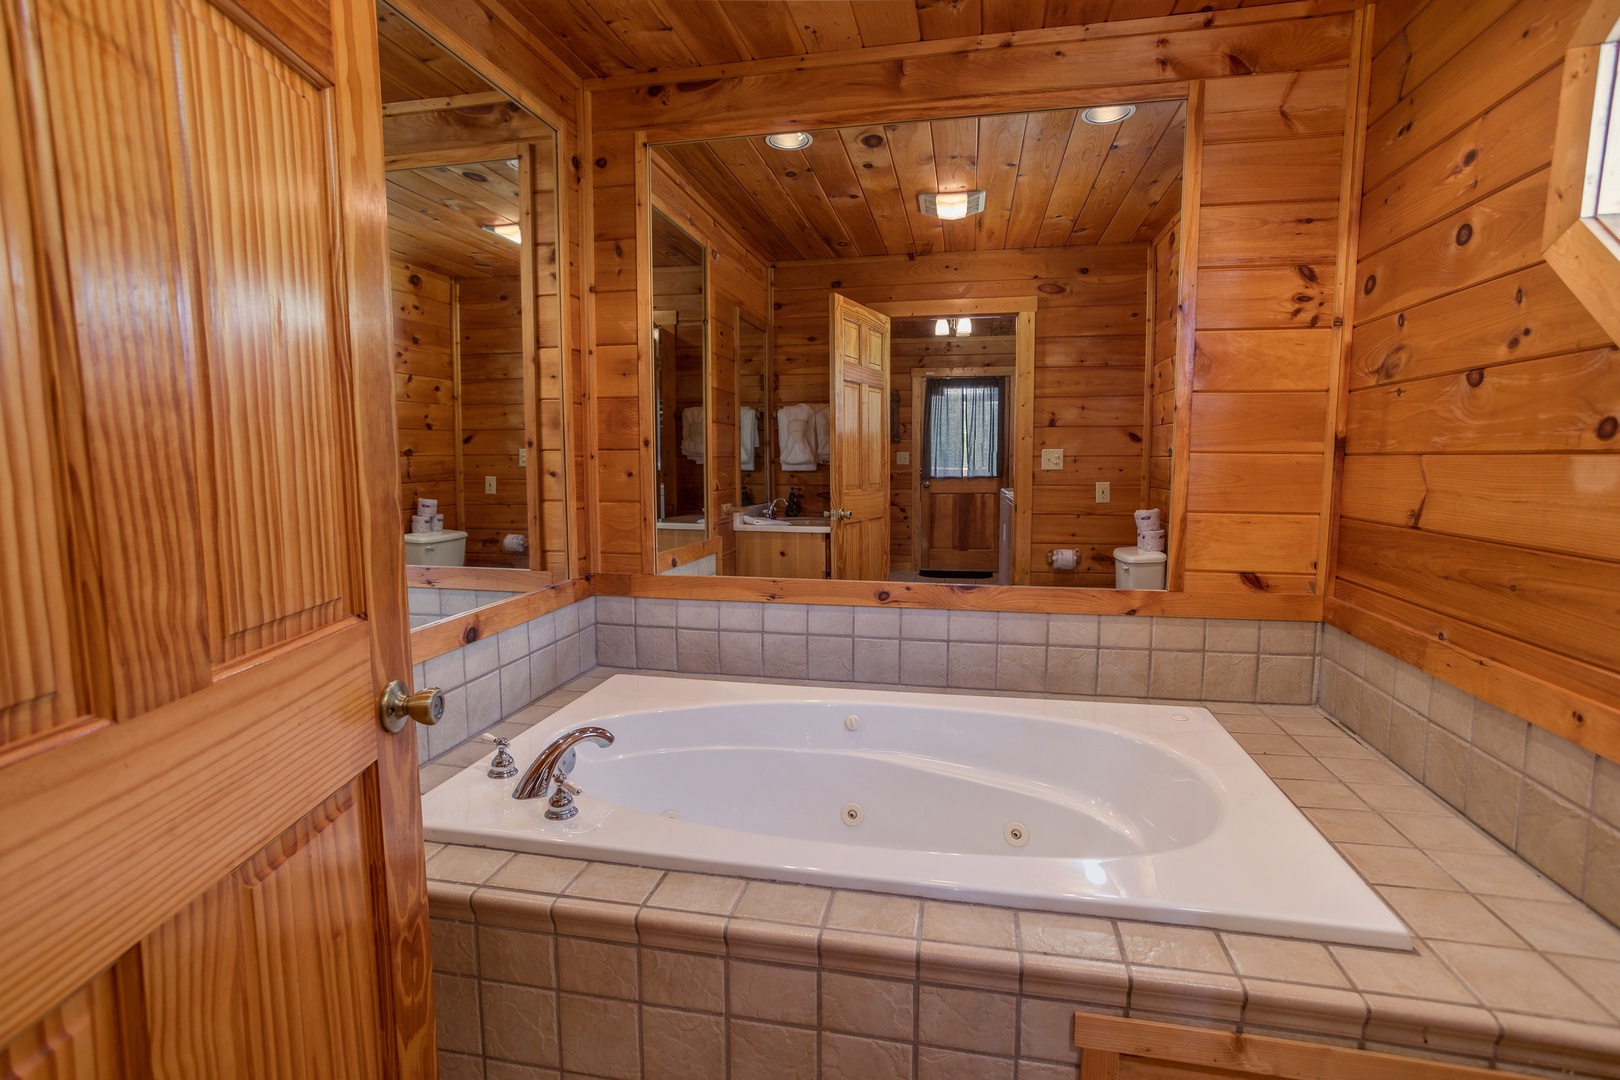 Jacuzzi tub with a mirrored surround at Cabin Fever, a 4-bedroom cabin rental located in Pigeon Forge